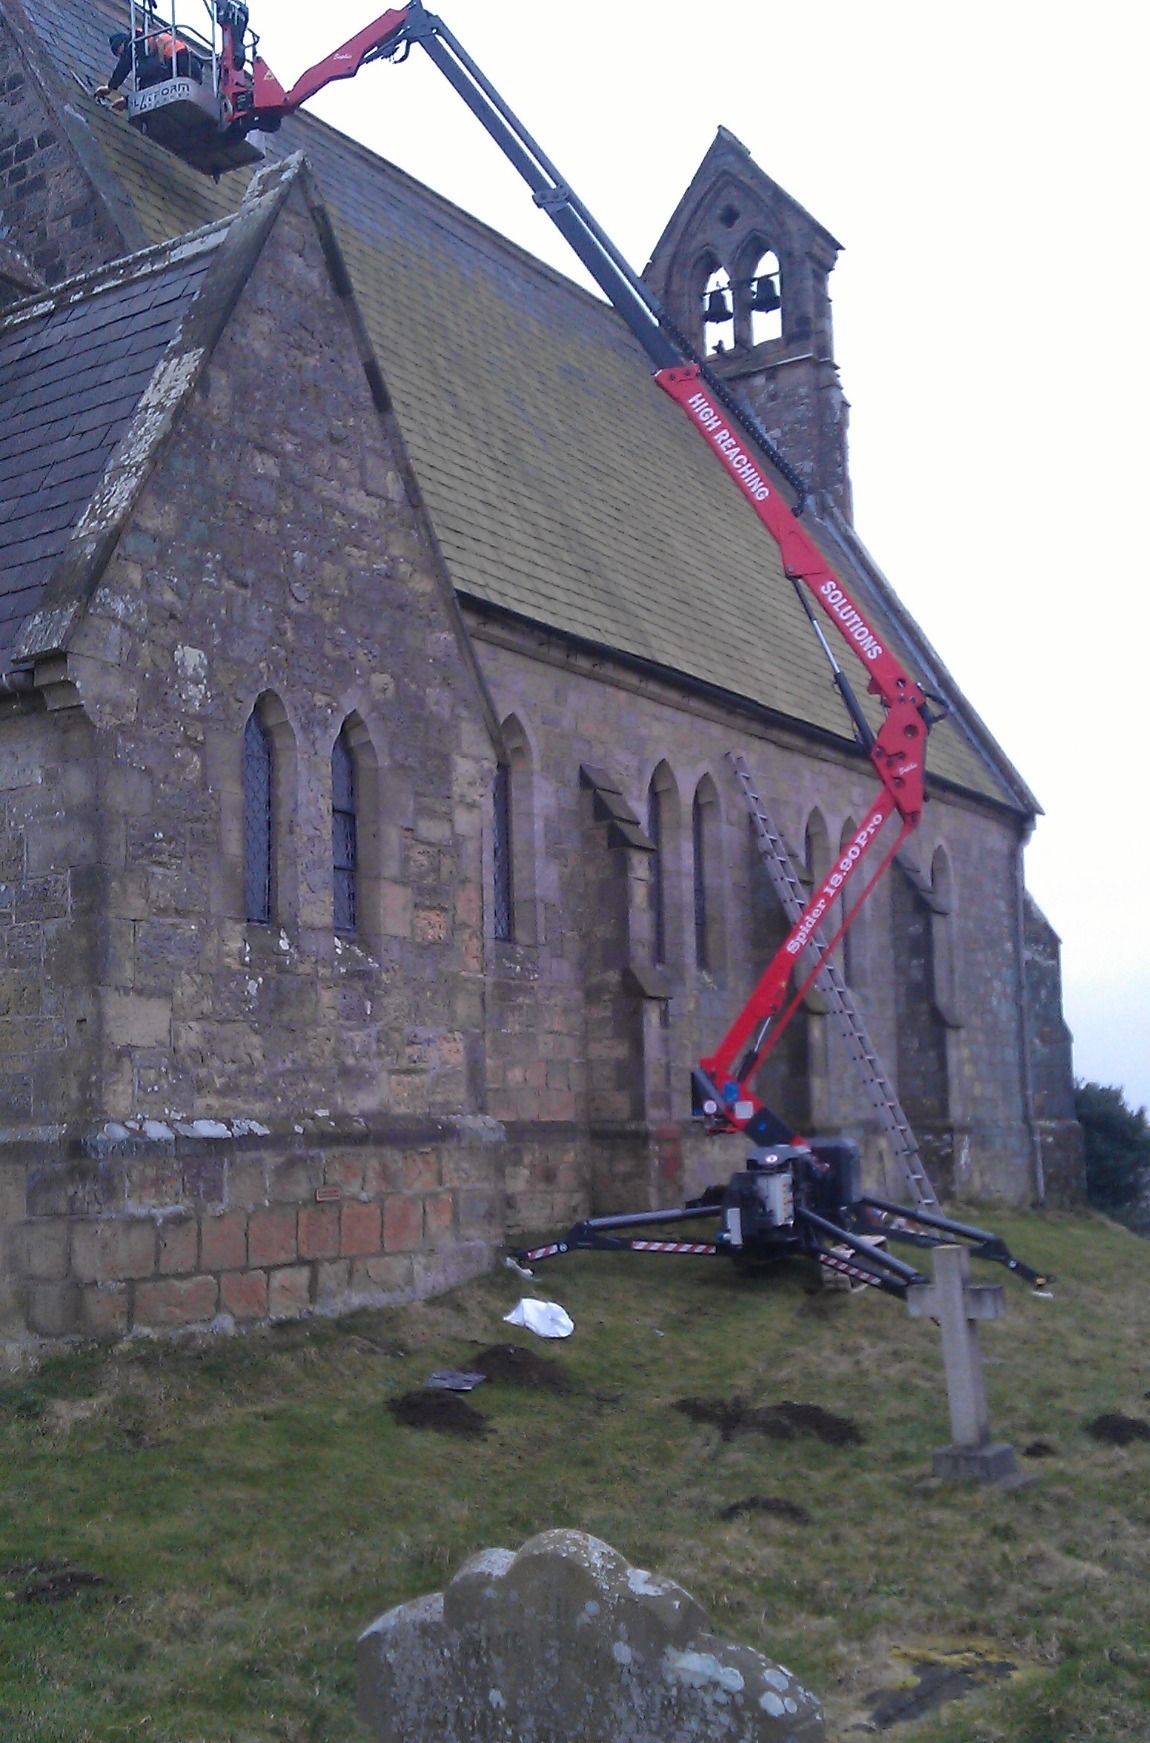 Sophie tracked spider cherrypicker working on church roof from slopped ground in churchyard.